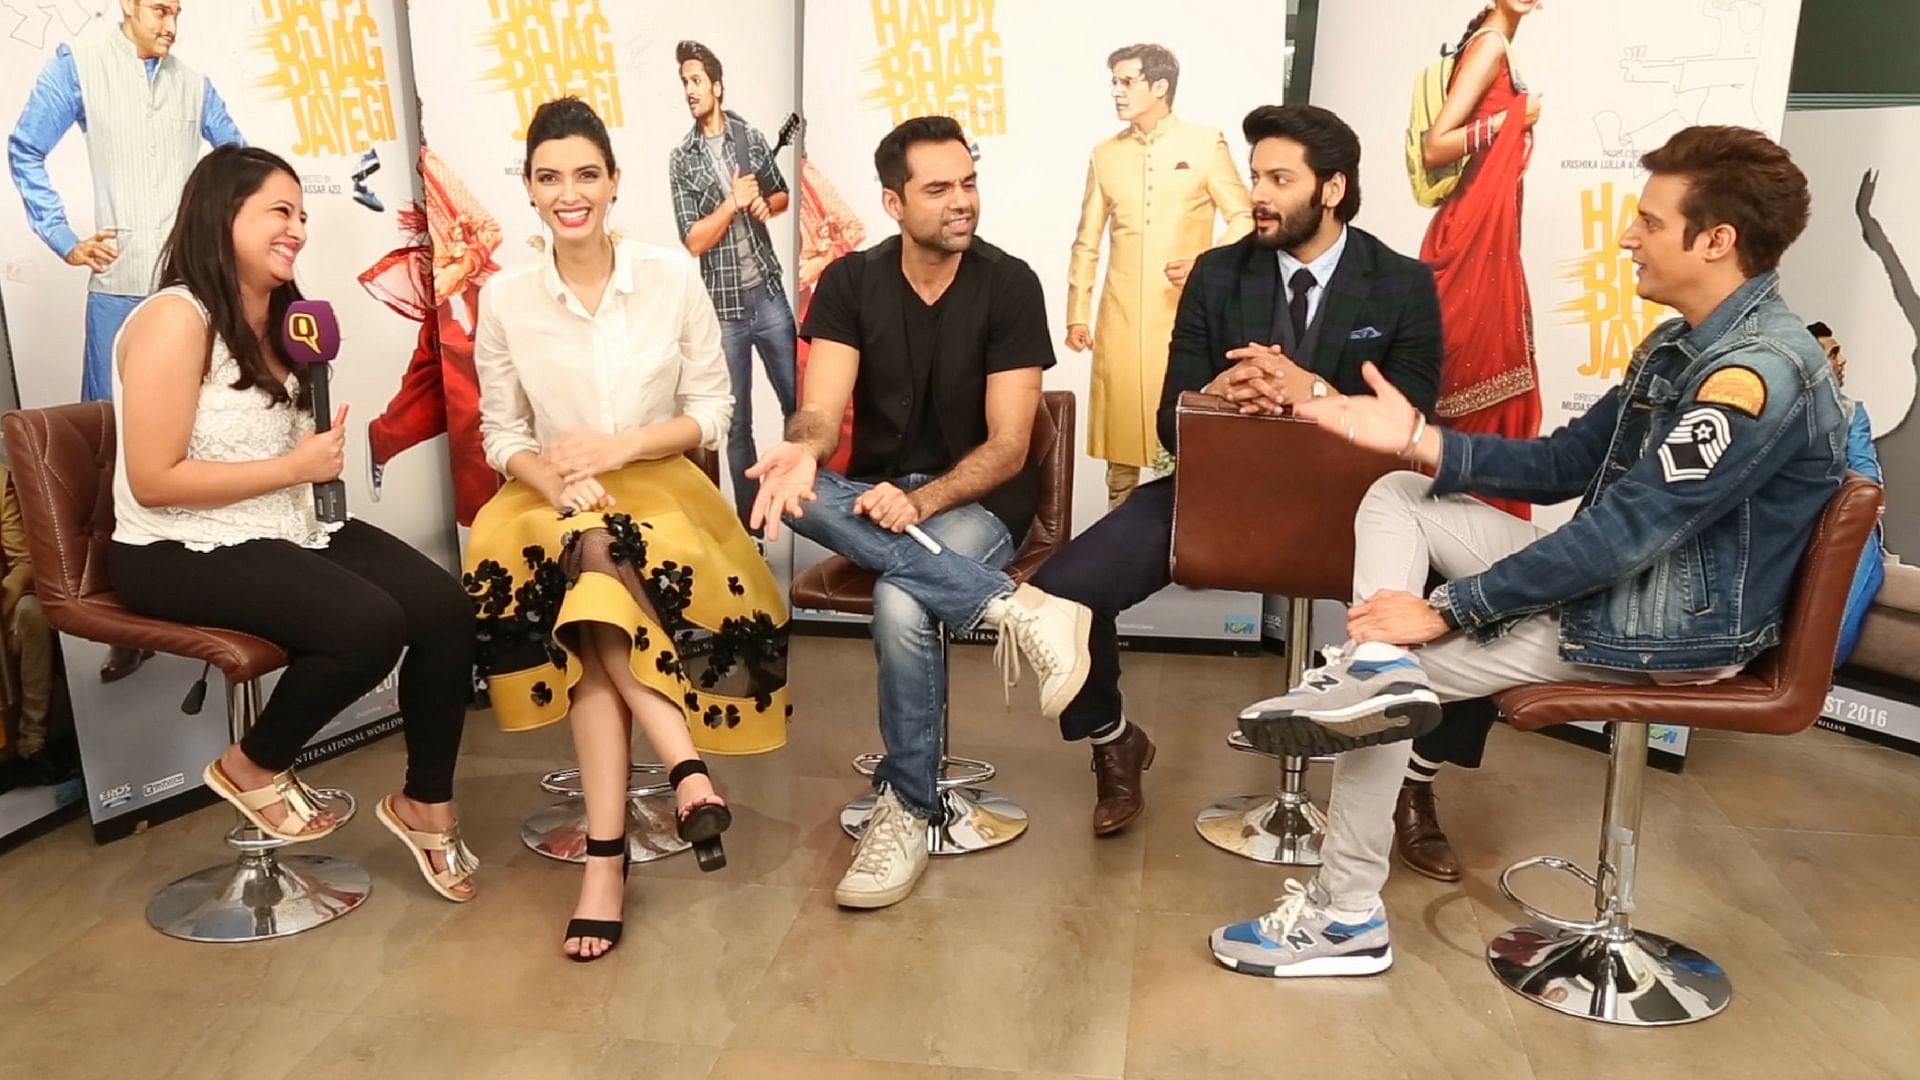 Diana Penty, Abhay Deol, Ali Fazal and Jimmy Shergill in a conversation with The Quint.